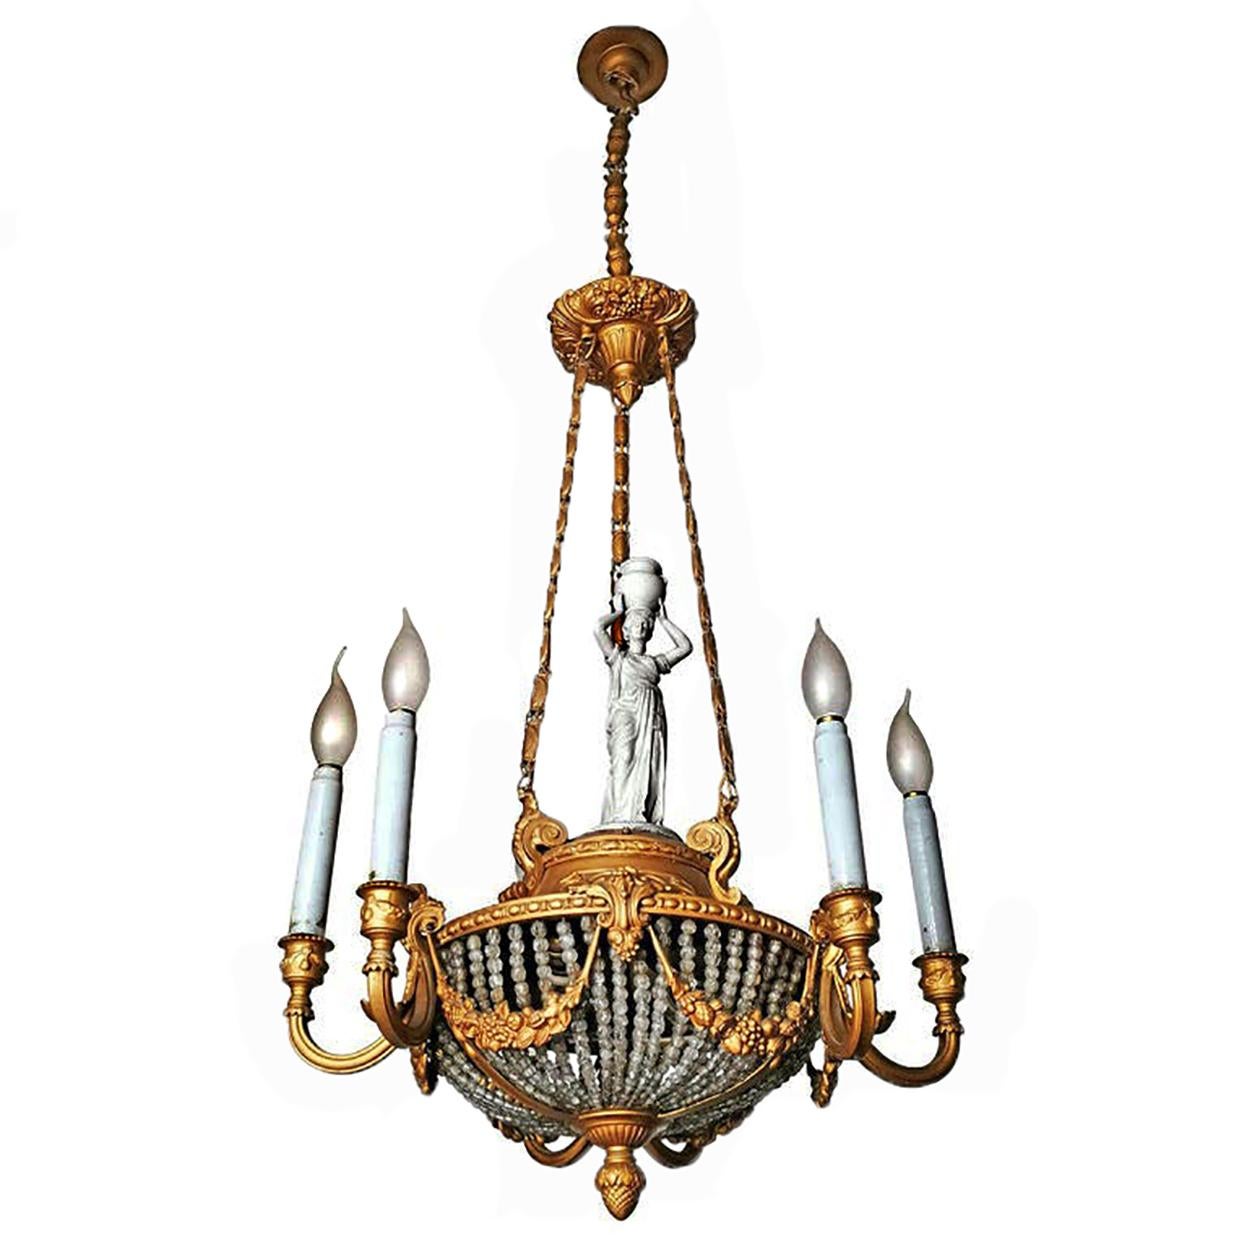 A wonderful gilt bronze and a beaded crystal basket, 8-light ceiling fixture decorated with fine ornaments and garlands, France, late 19th century. Porcelain caryatid and opaline white glass candles.
Measures:
Diameter 21.7 in/ 55 cm
Height 53.2 in